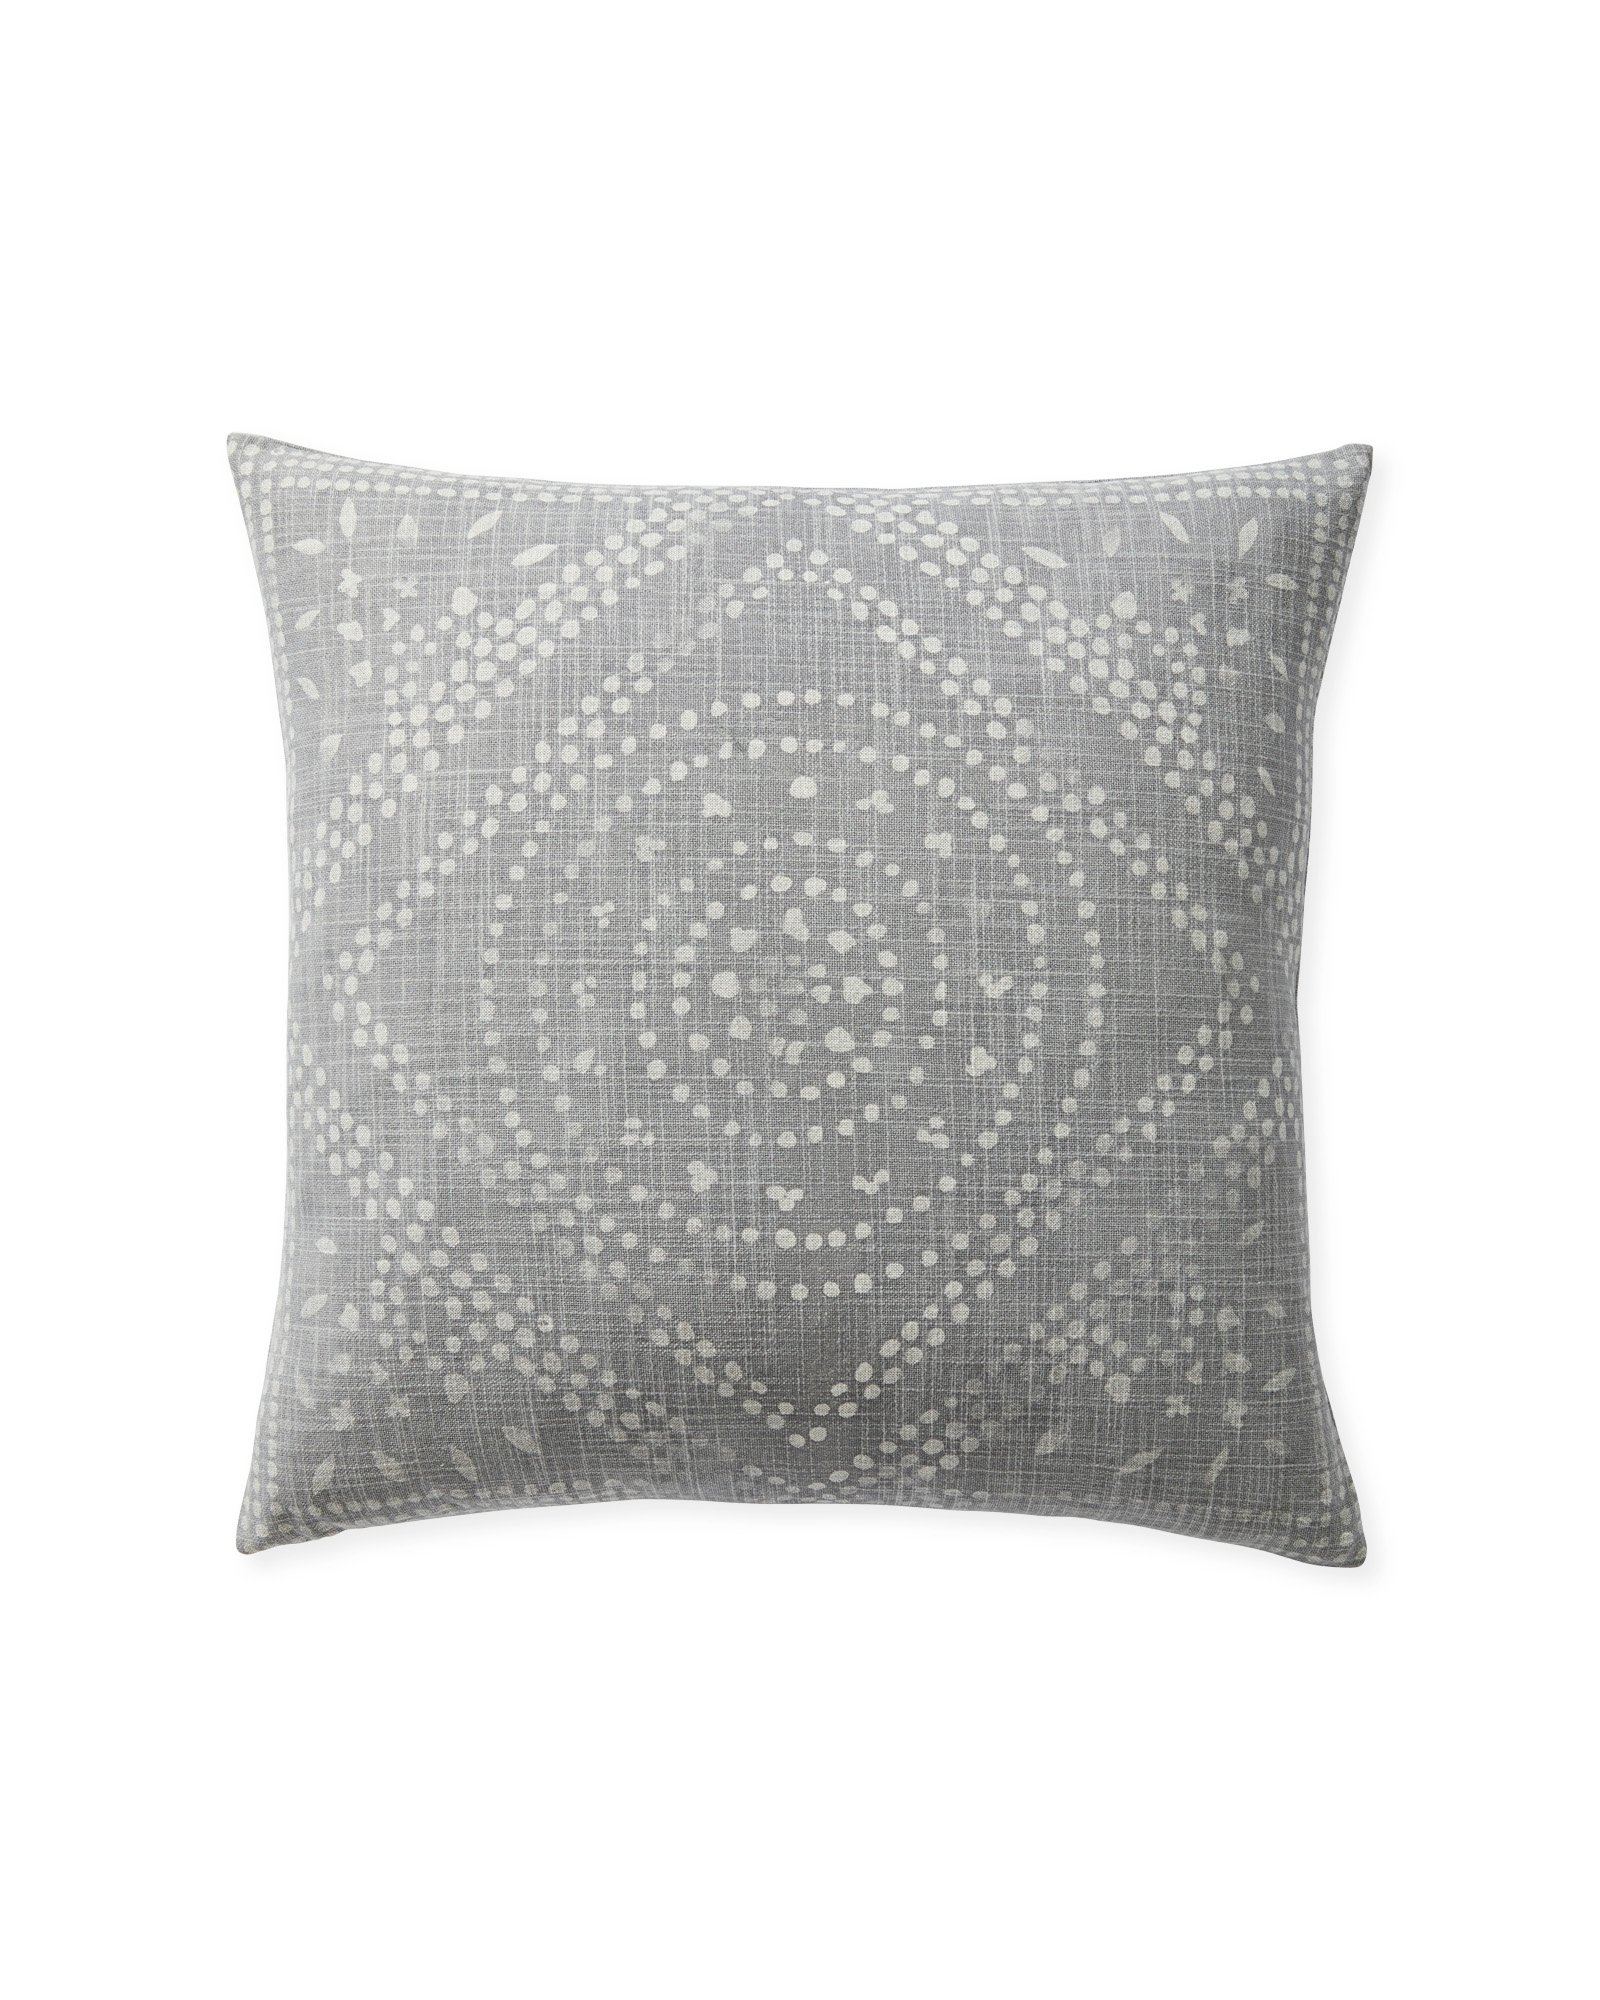 Camille Diamond Medallion 20"SQ. Pillow Cover - Smoke - Insert sold separately - Image 0